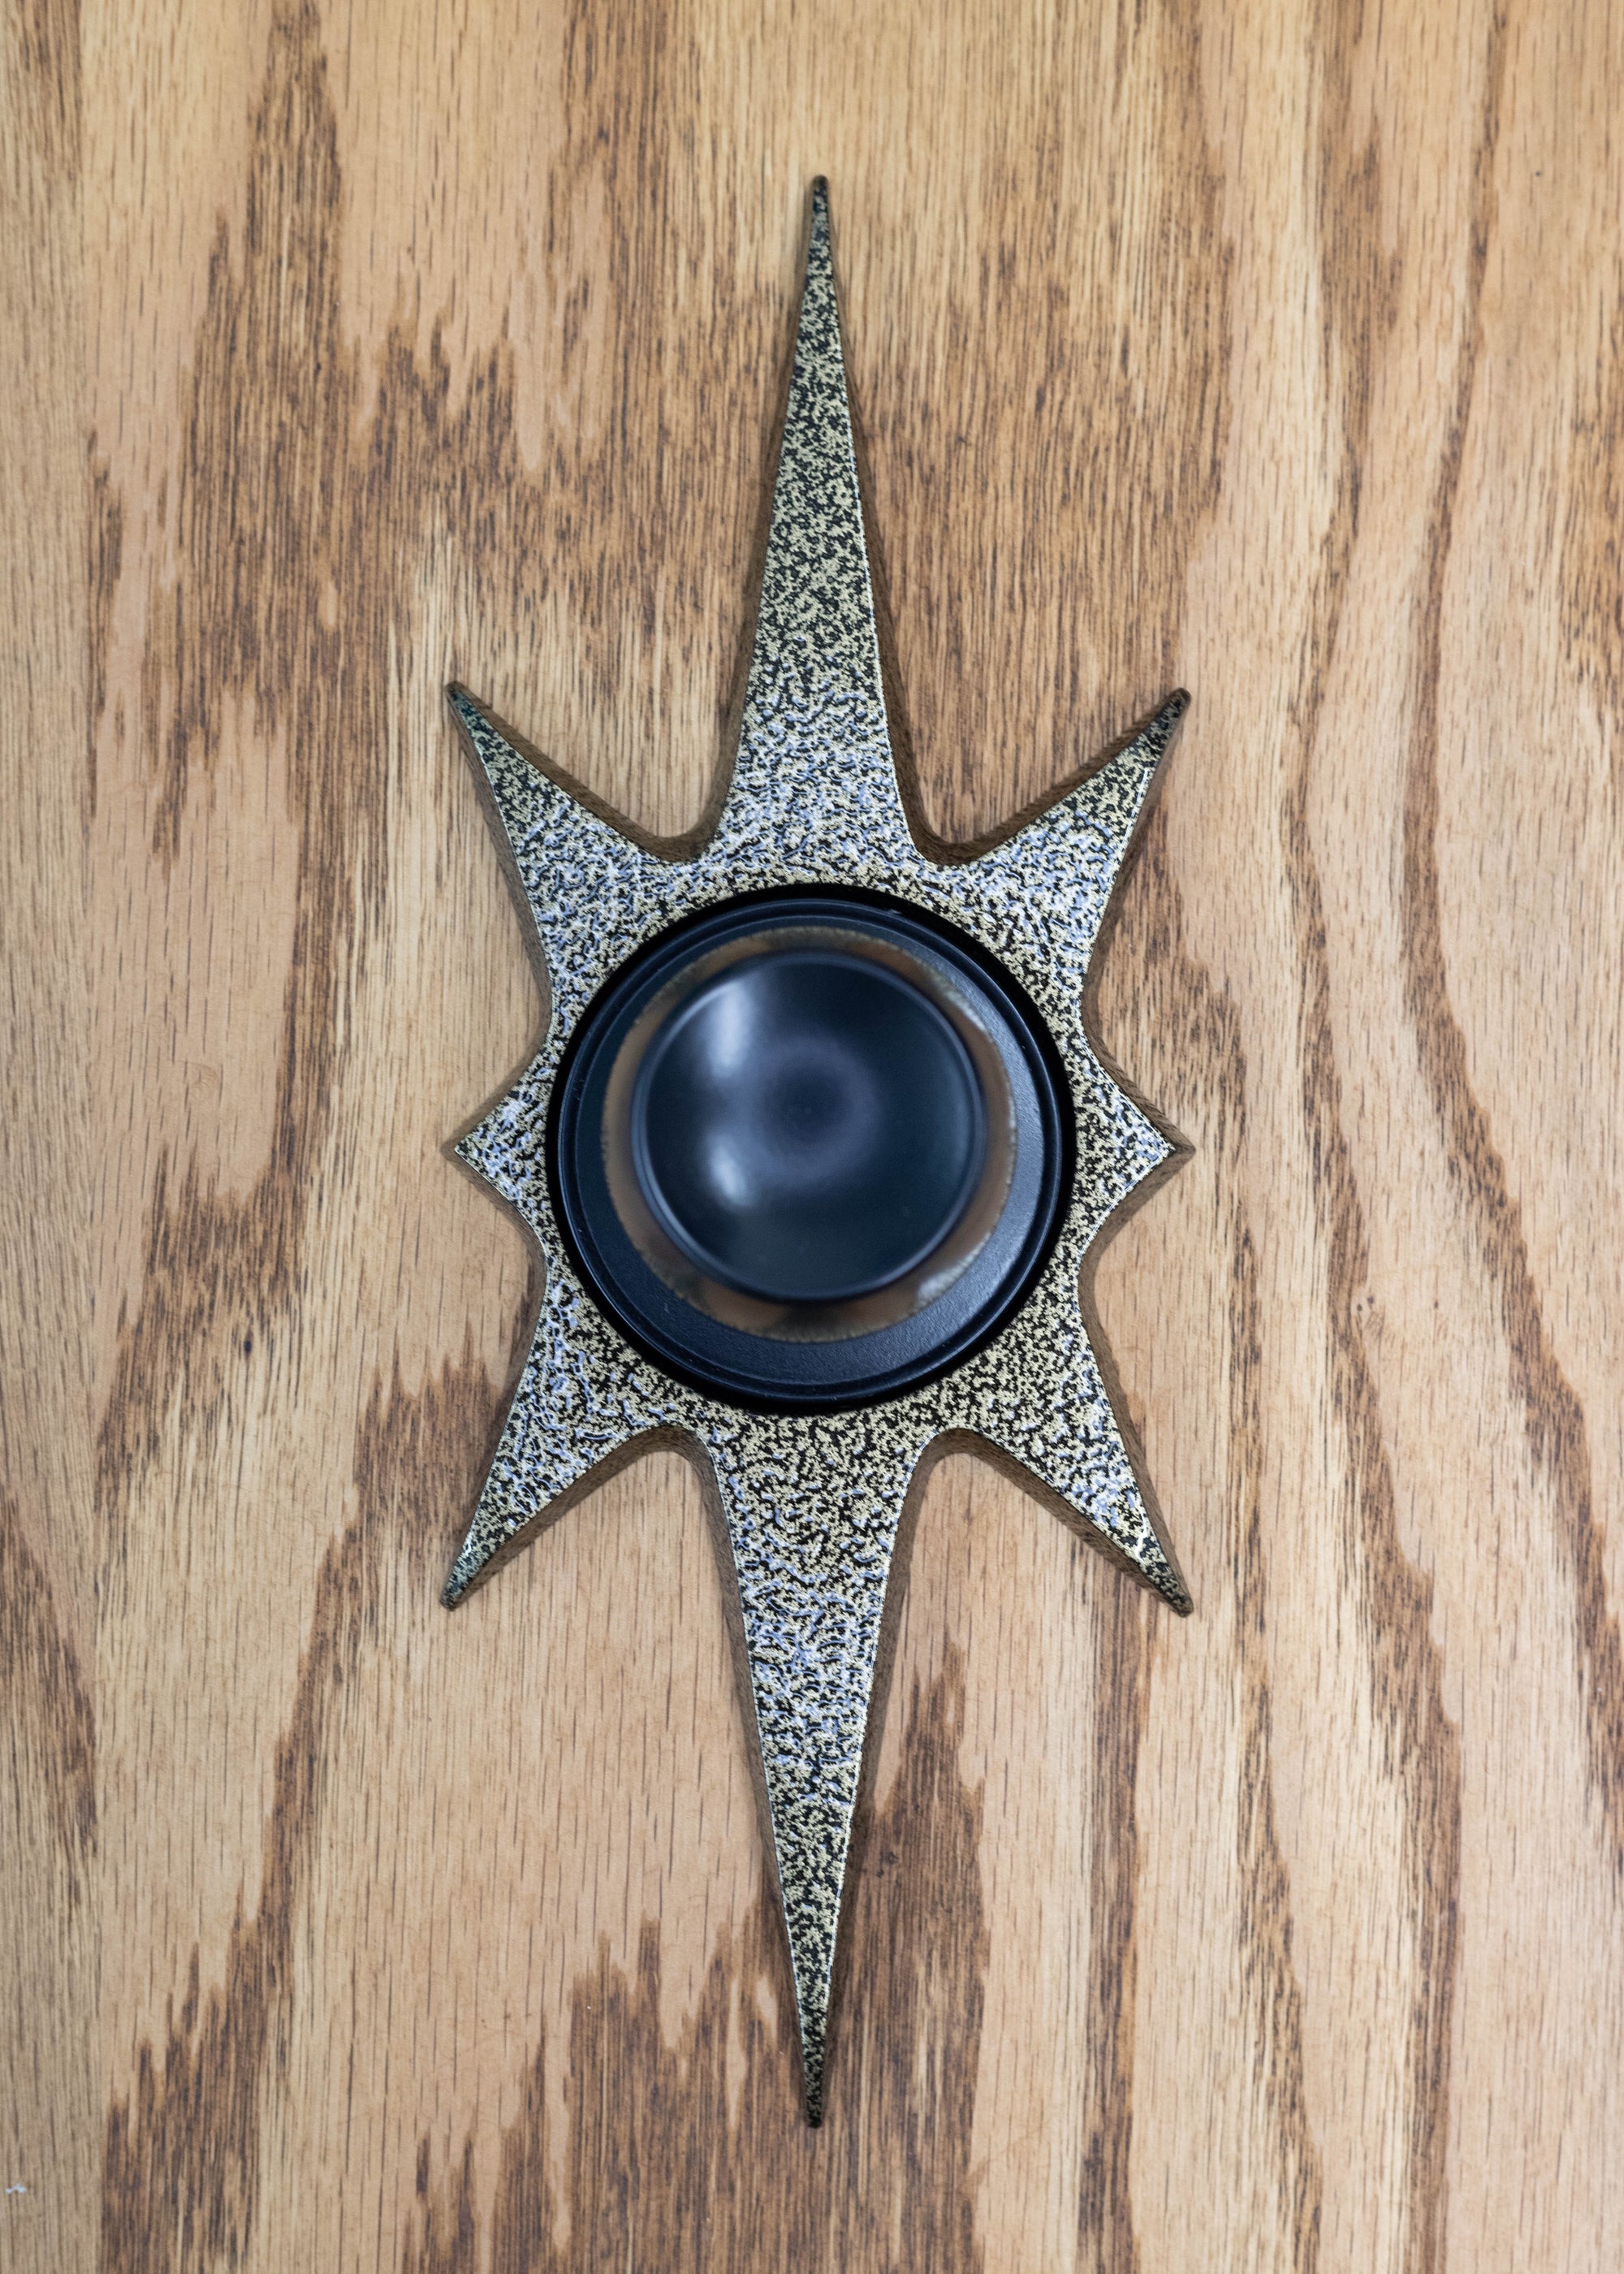 Gold vein starburst doorknob escutcheon.  The gold vein powder coating has a crackled texture that is a mixture of gold and black. It is still smooth and glossy, giving reflection to light. It is paired with a black knob in this photo.